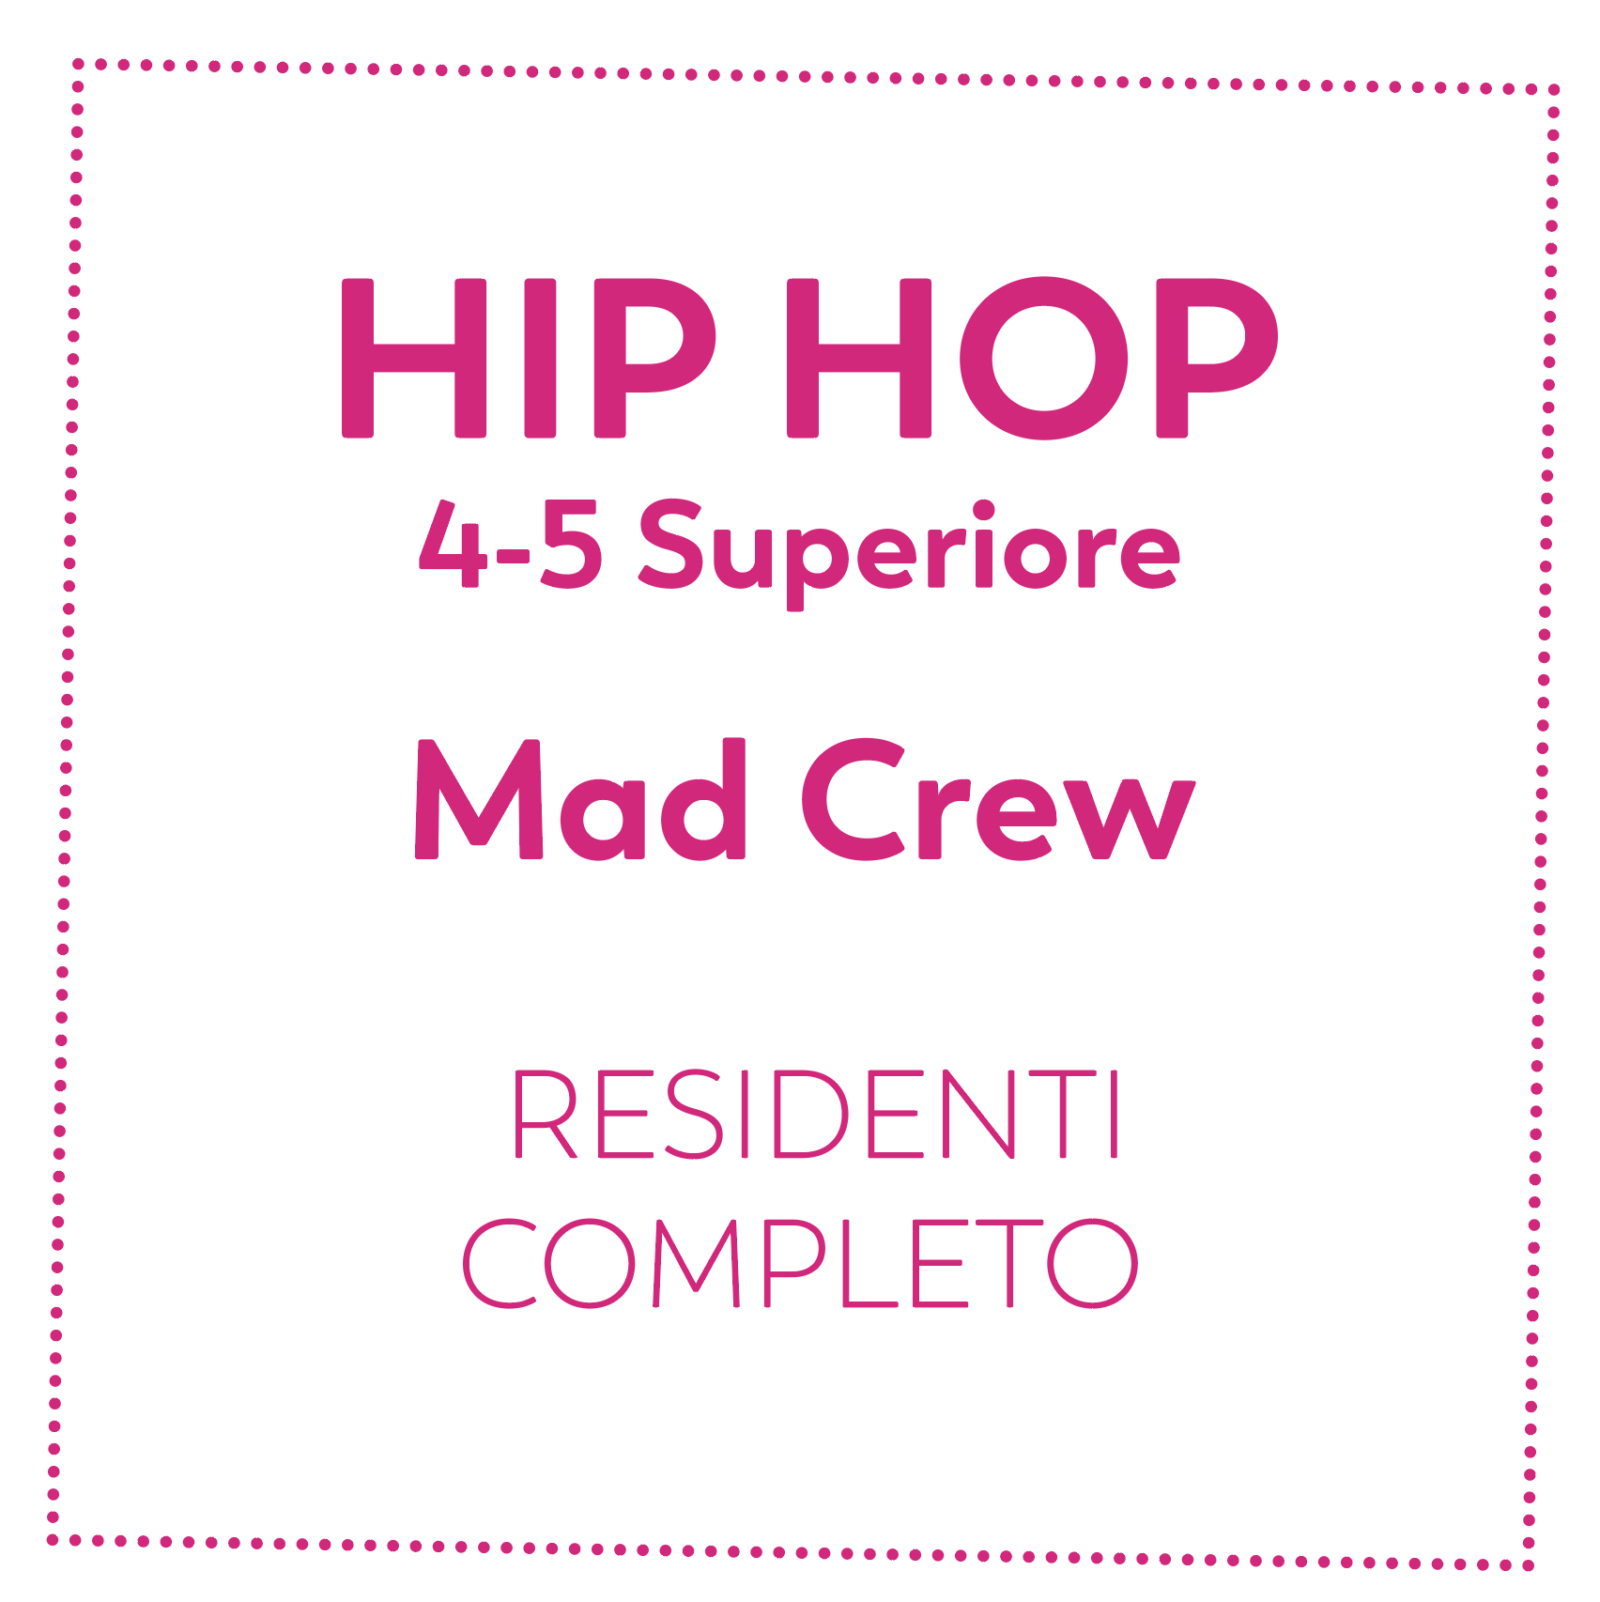 HIP HOP 4-5 SUP - RESIDENTI - COMPLETO